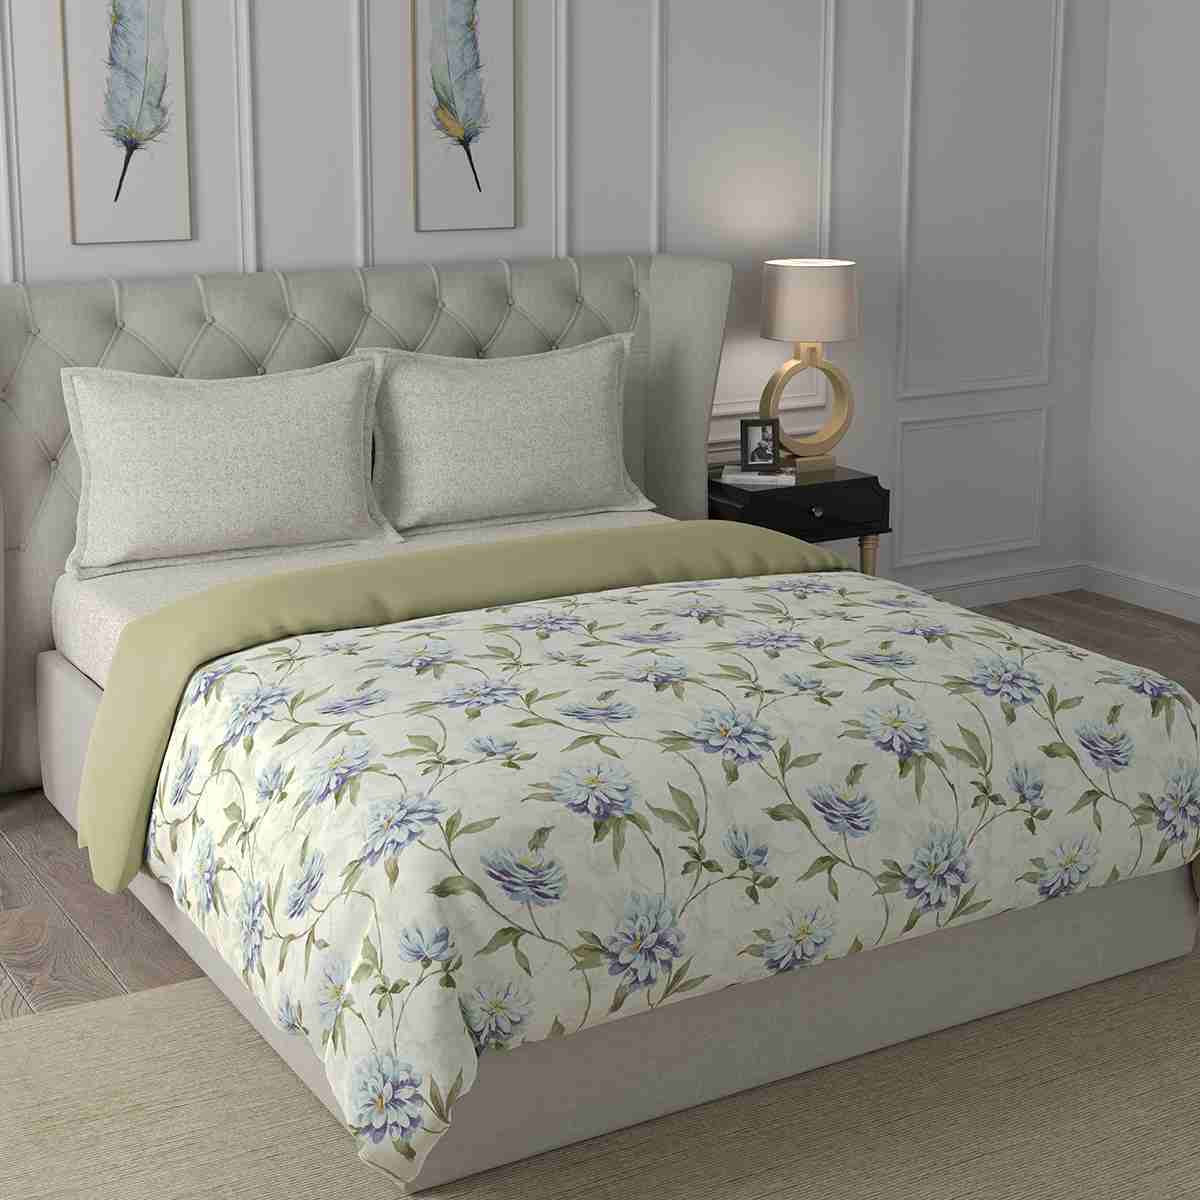 Regency Neveah Blue 4PC Quilt/Quilted Bed Cover Set